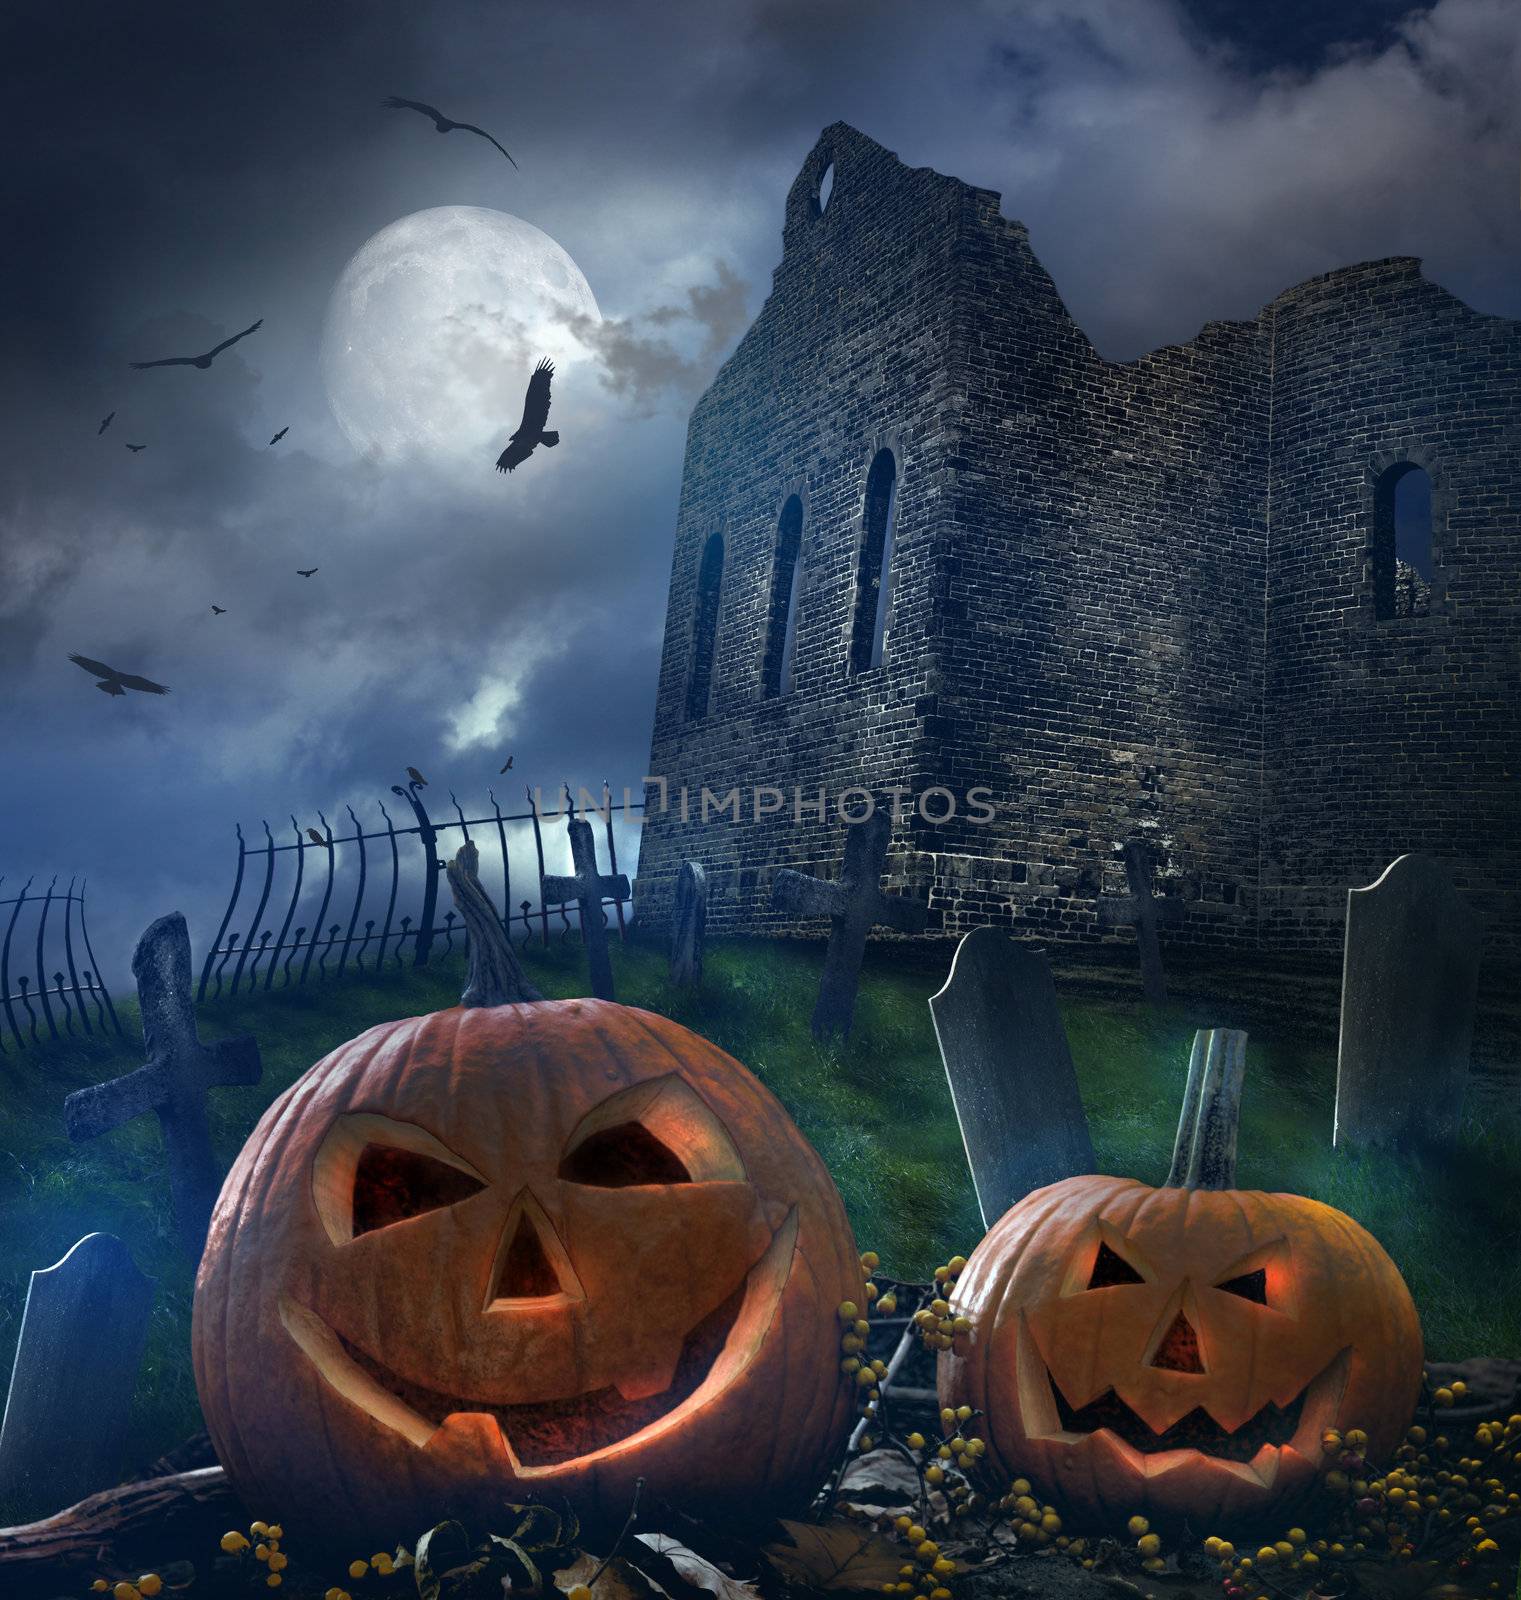 Pumpkins in graveyard with church ruins by Sandralise